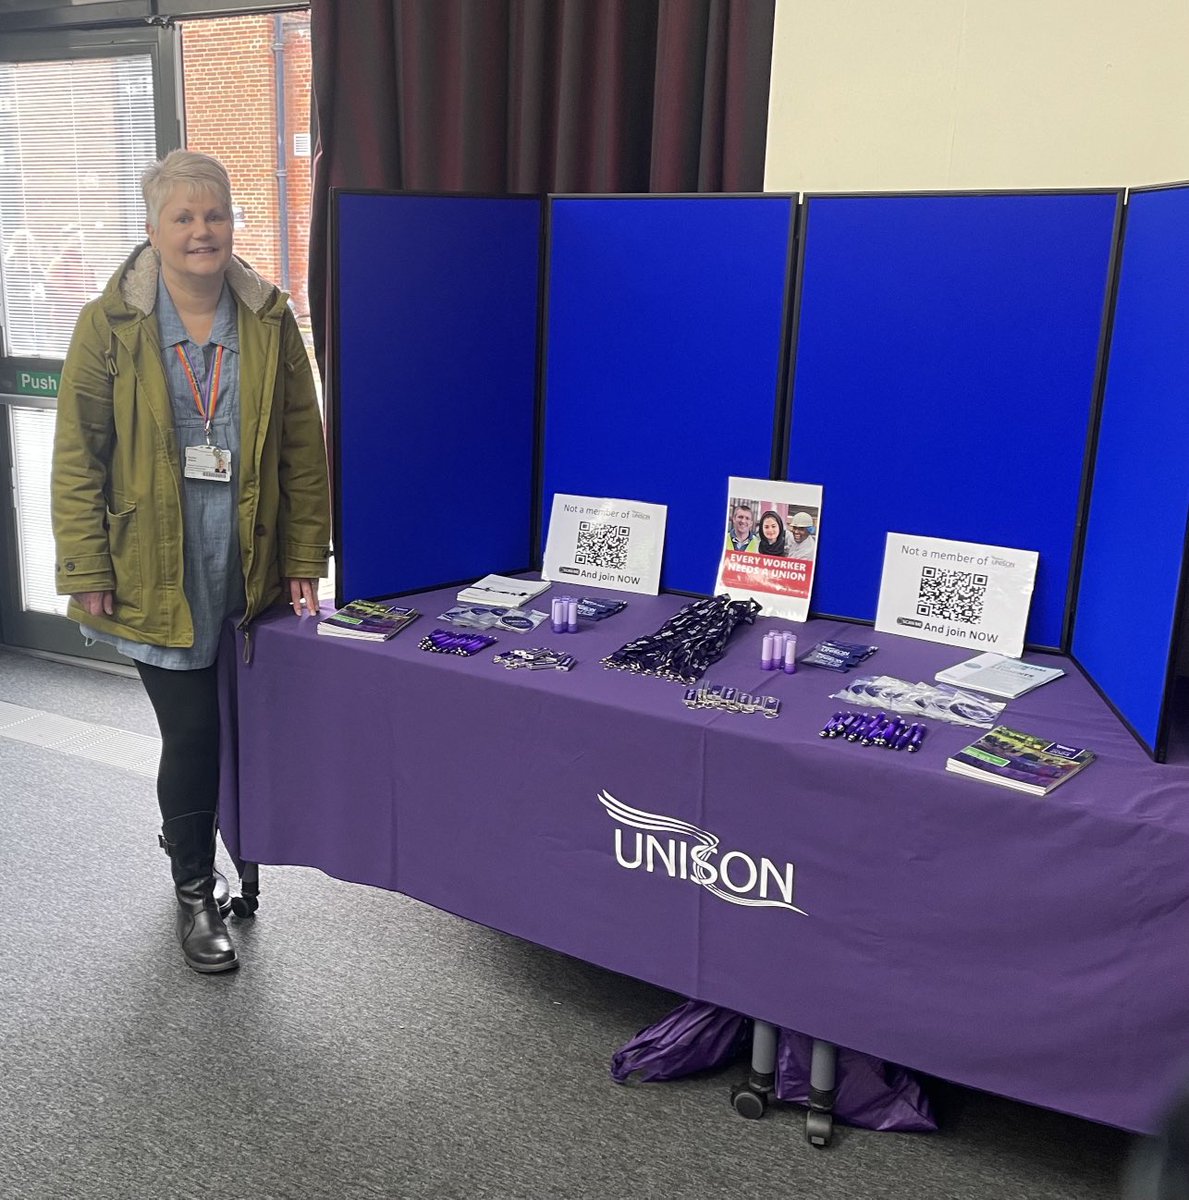 We are at ⁦@UNIHull⁩ this morning speaking to student #ODPs about the benefits of joining ⁦@unisontheunion⁩